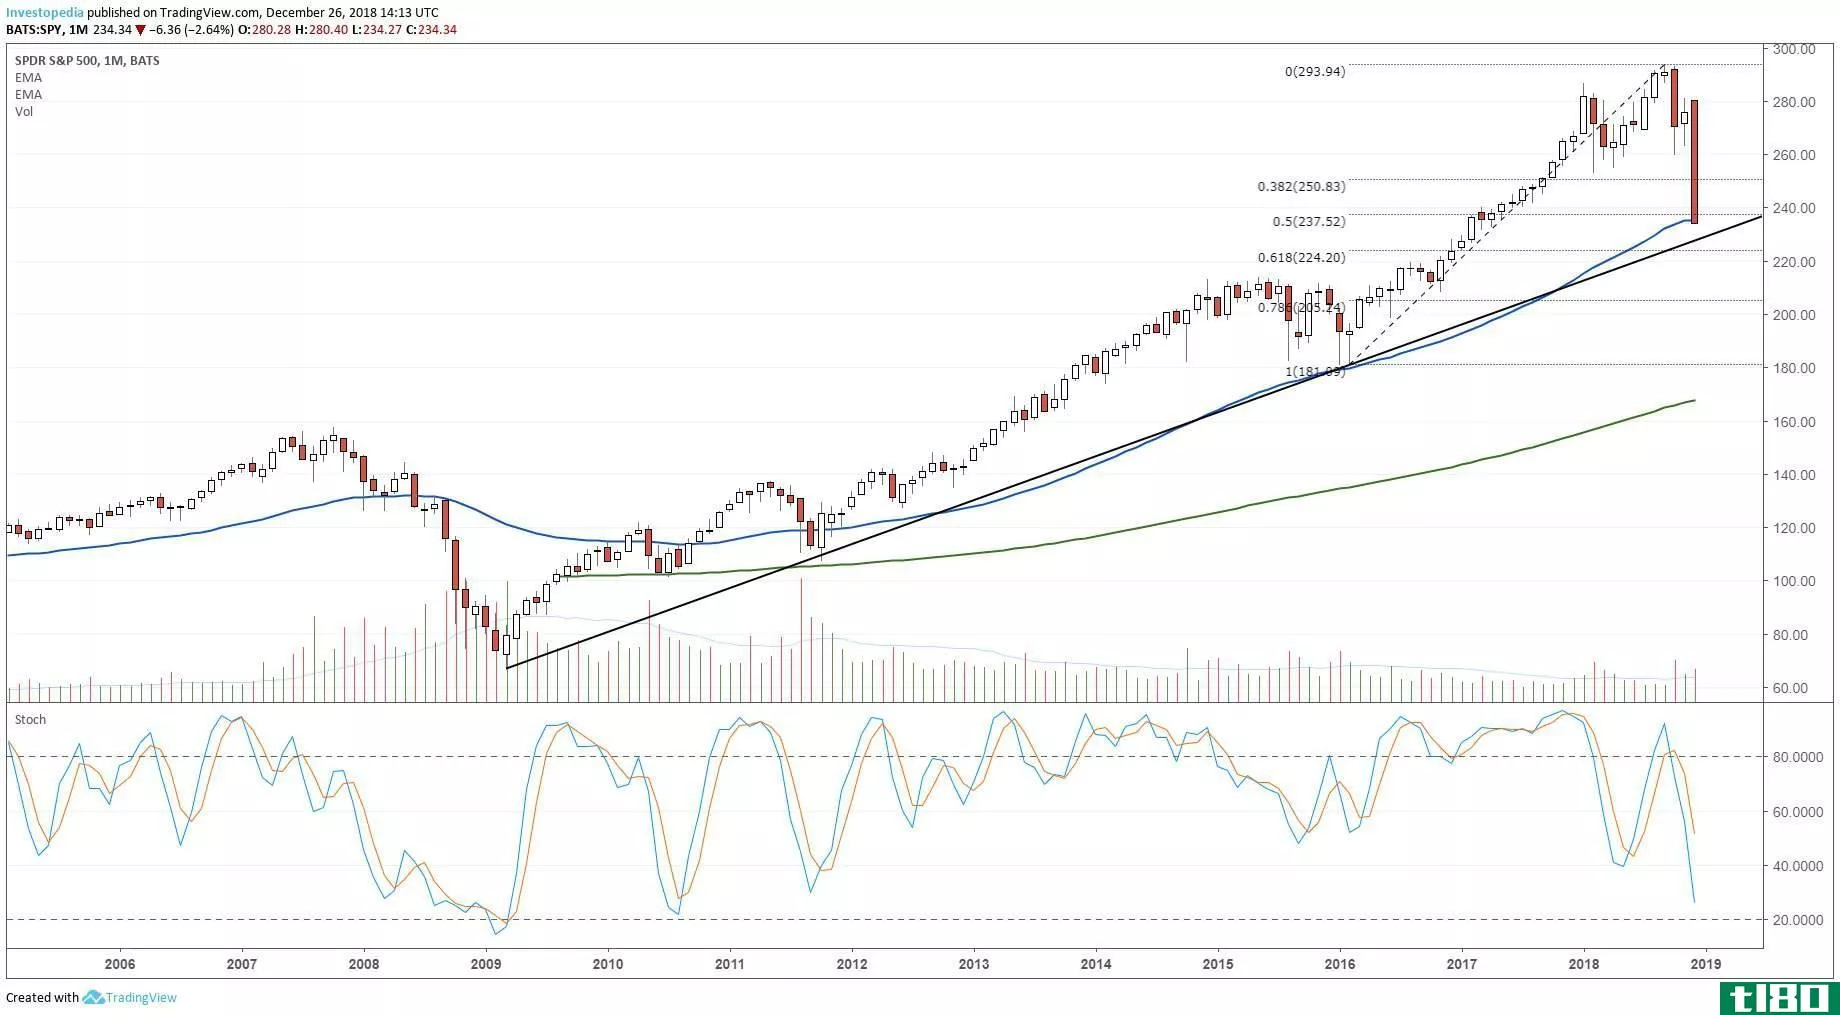 Technical chart showing the price performance of the SPDR S&P 500 ETF (SPY)